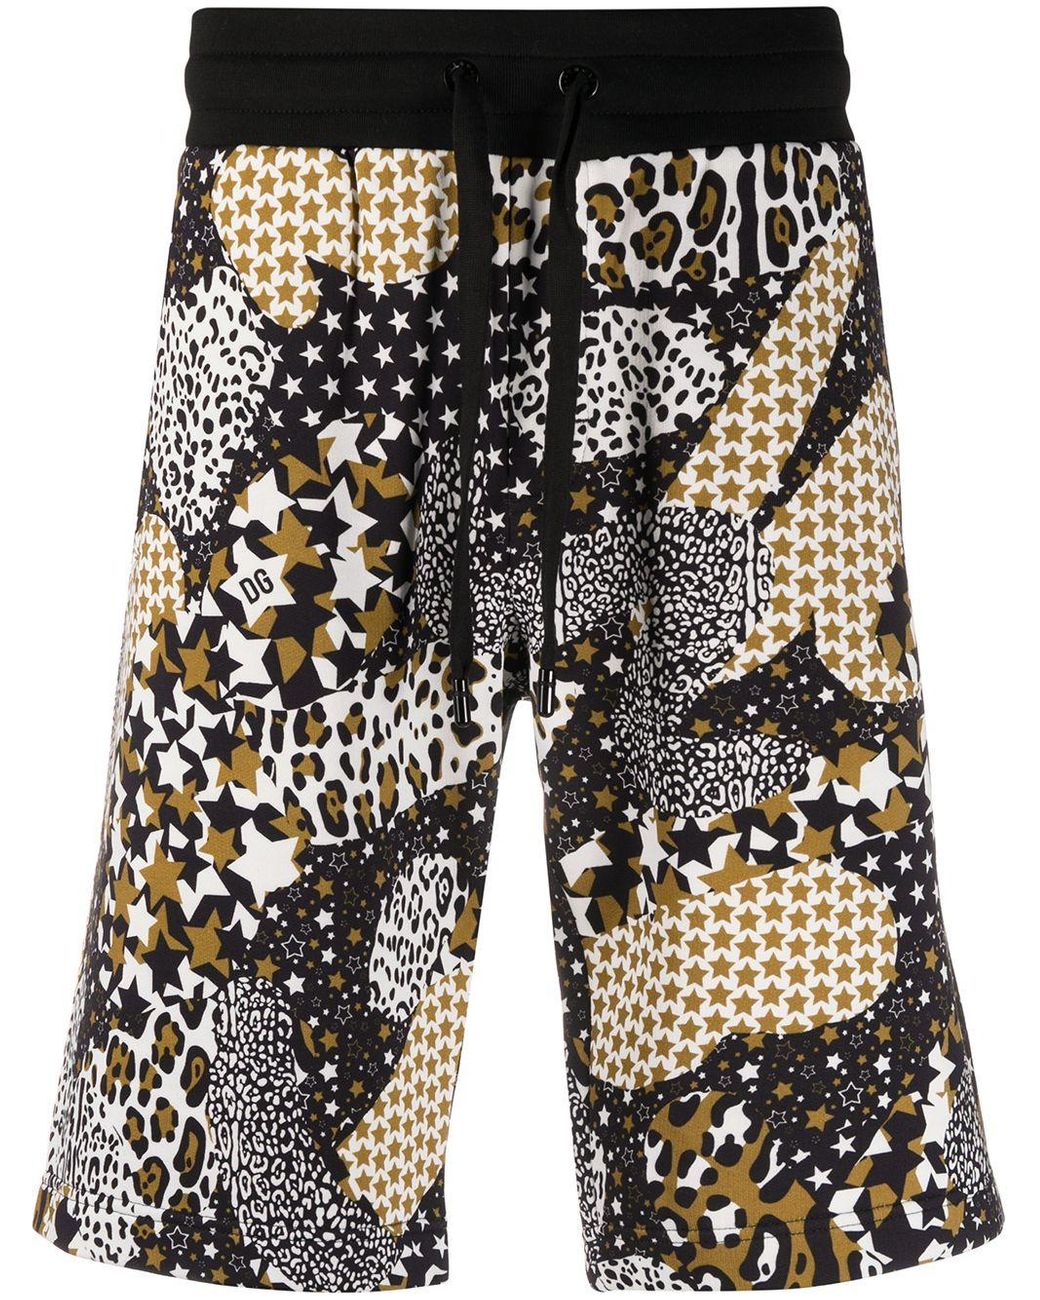 Dolce & Gabbana Cotton Mixed Print Shorts in Black for Men - Lyst